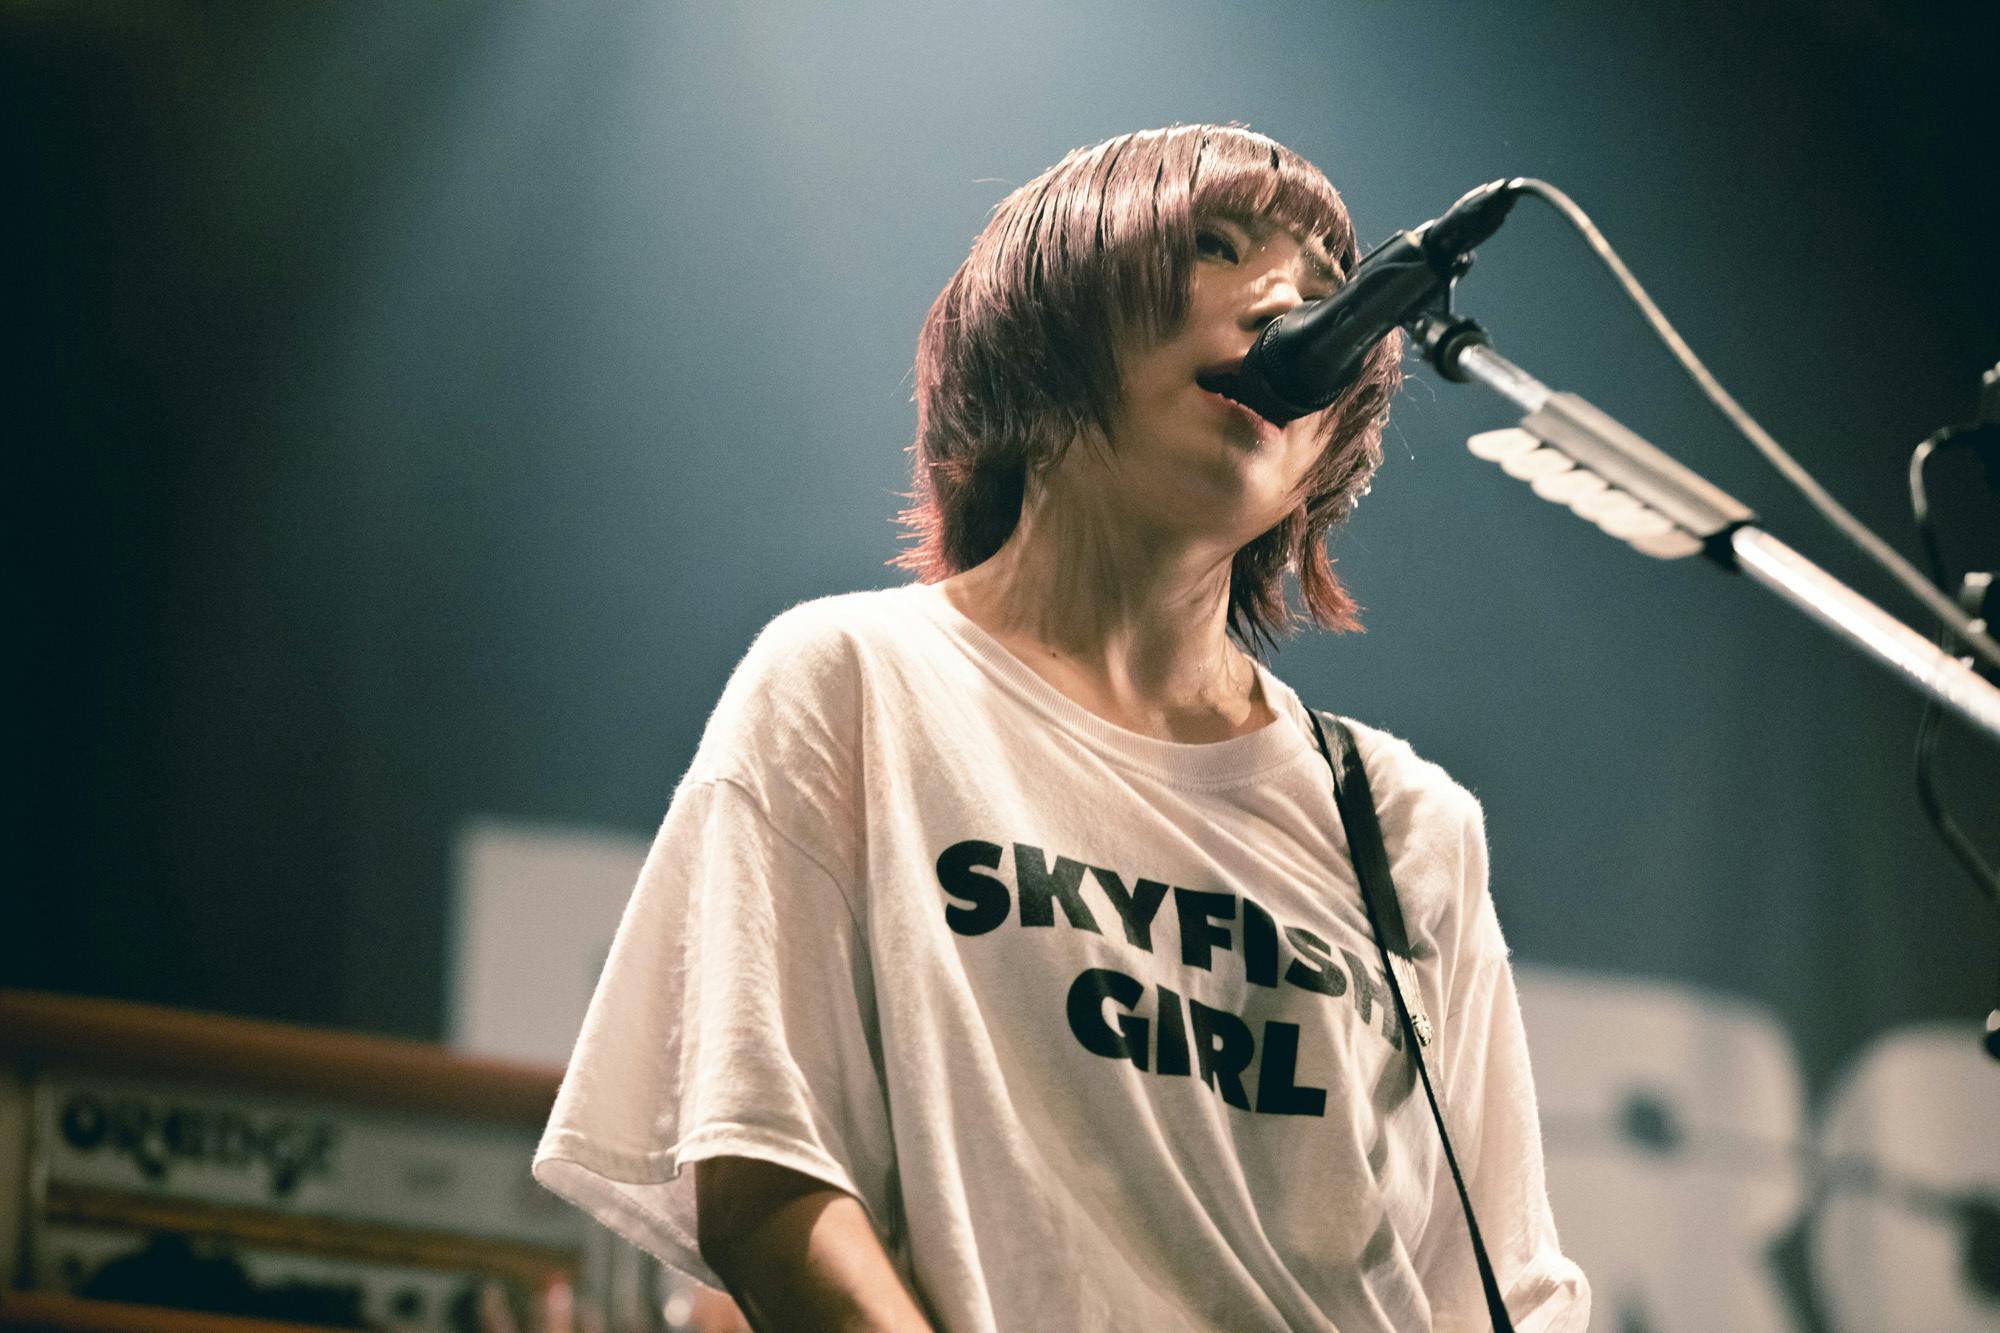 PEDRO  GO TO BED TOUR ロングTシャツ